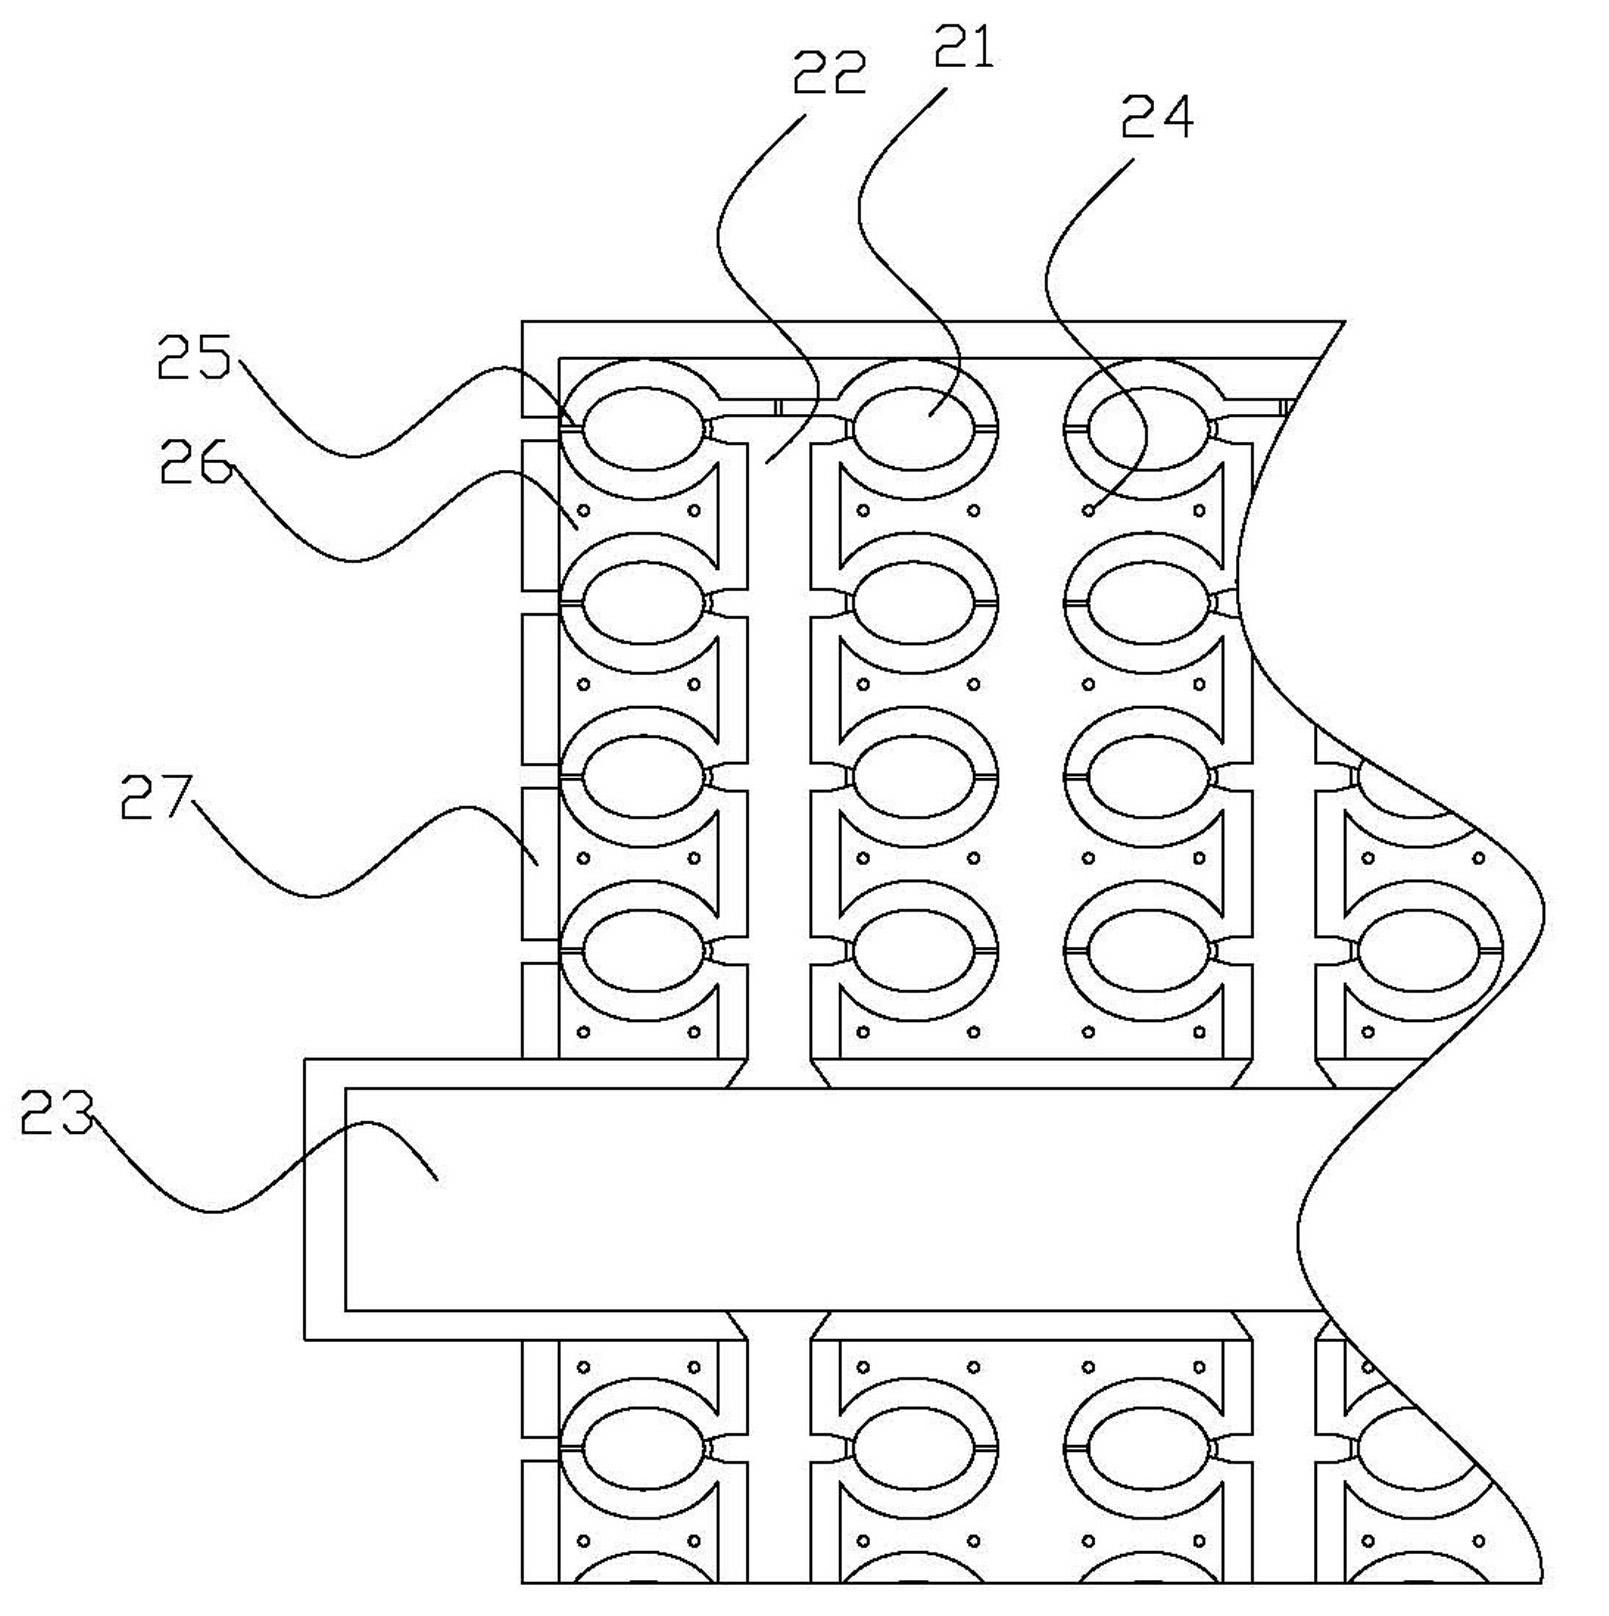 Method and mold for packaging high-power LED (light emitting diode) liquid silicon rubber